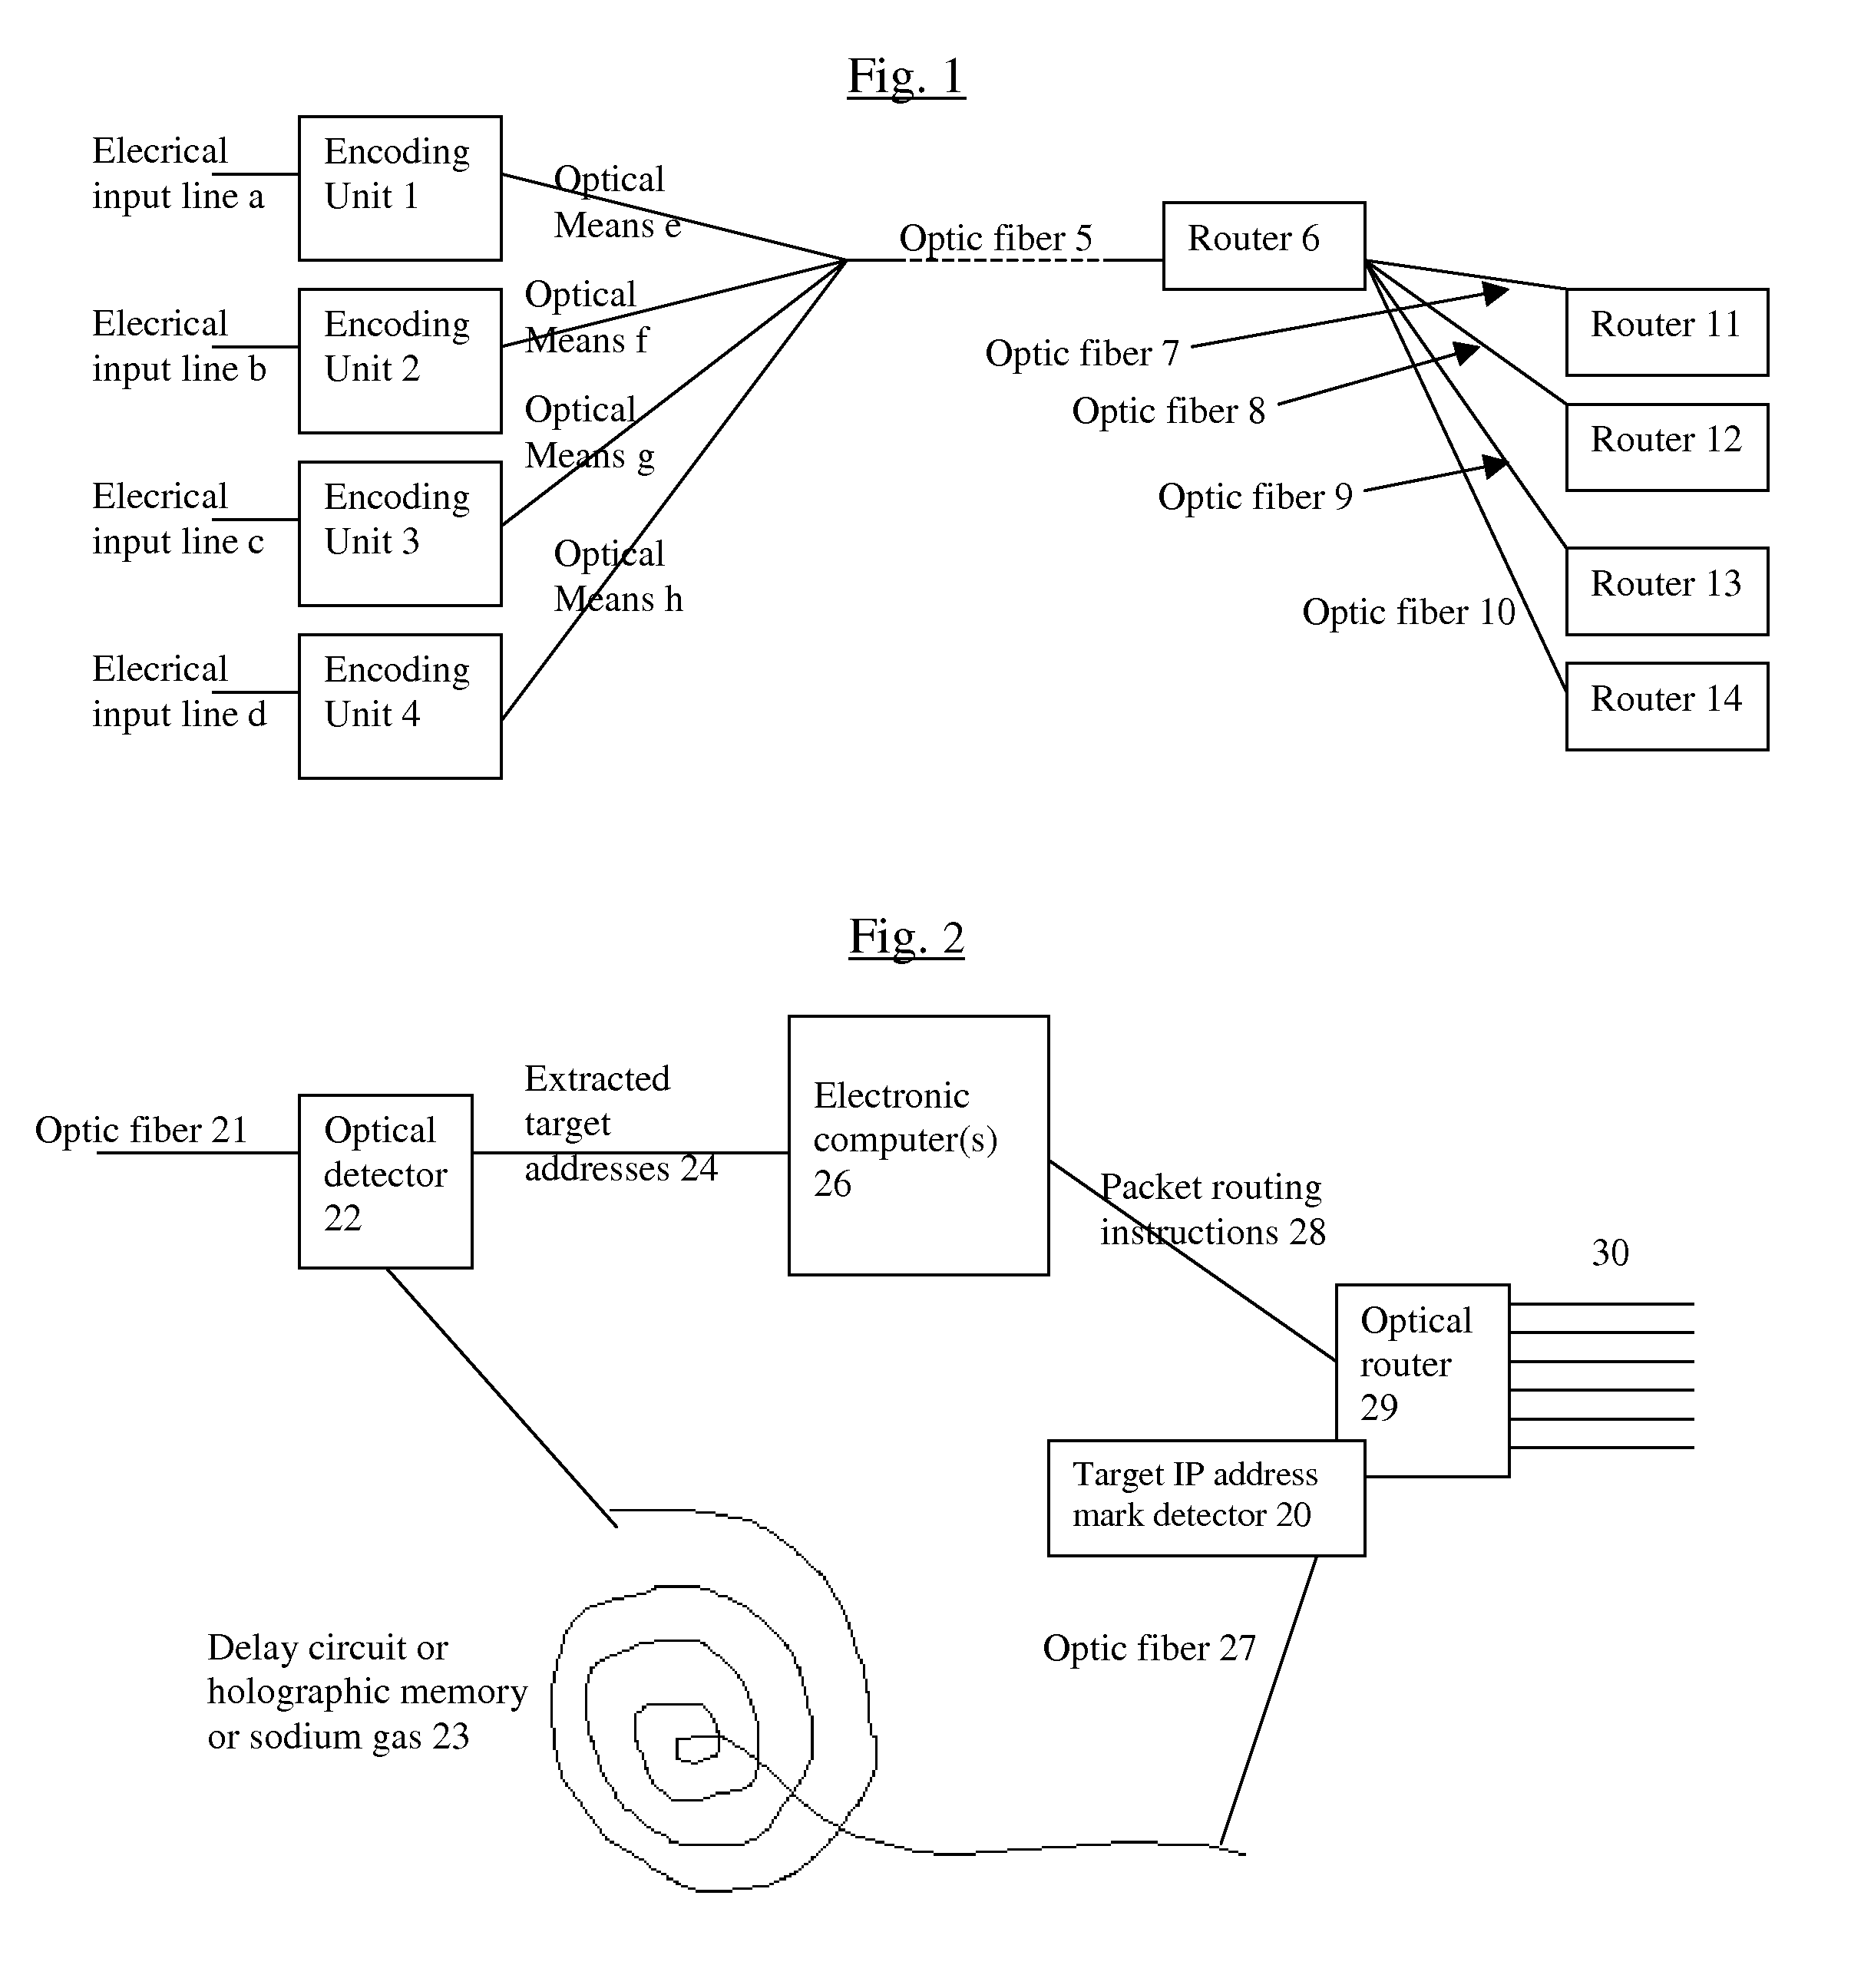 System and method for improving the efficiency of routers on the Internet and/or cellular networks and/or other networks and alleviating bottlenecks and overloads on the network